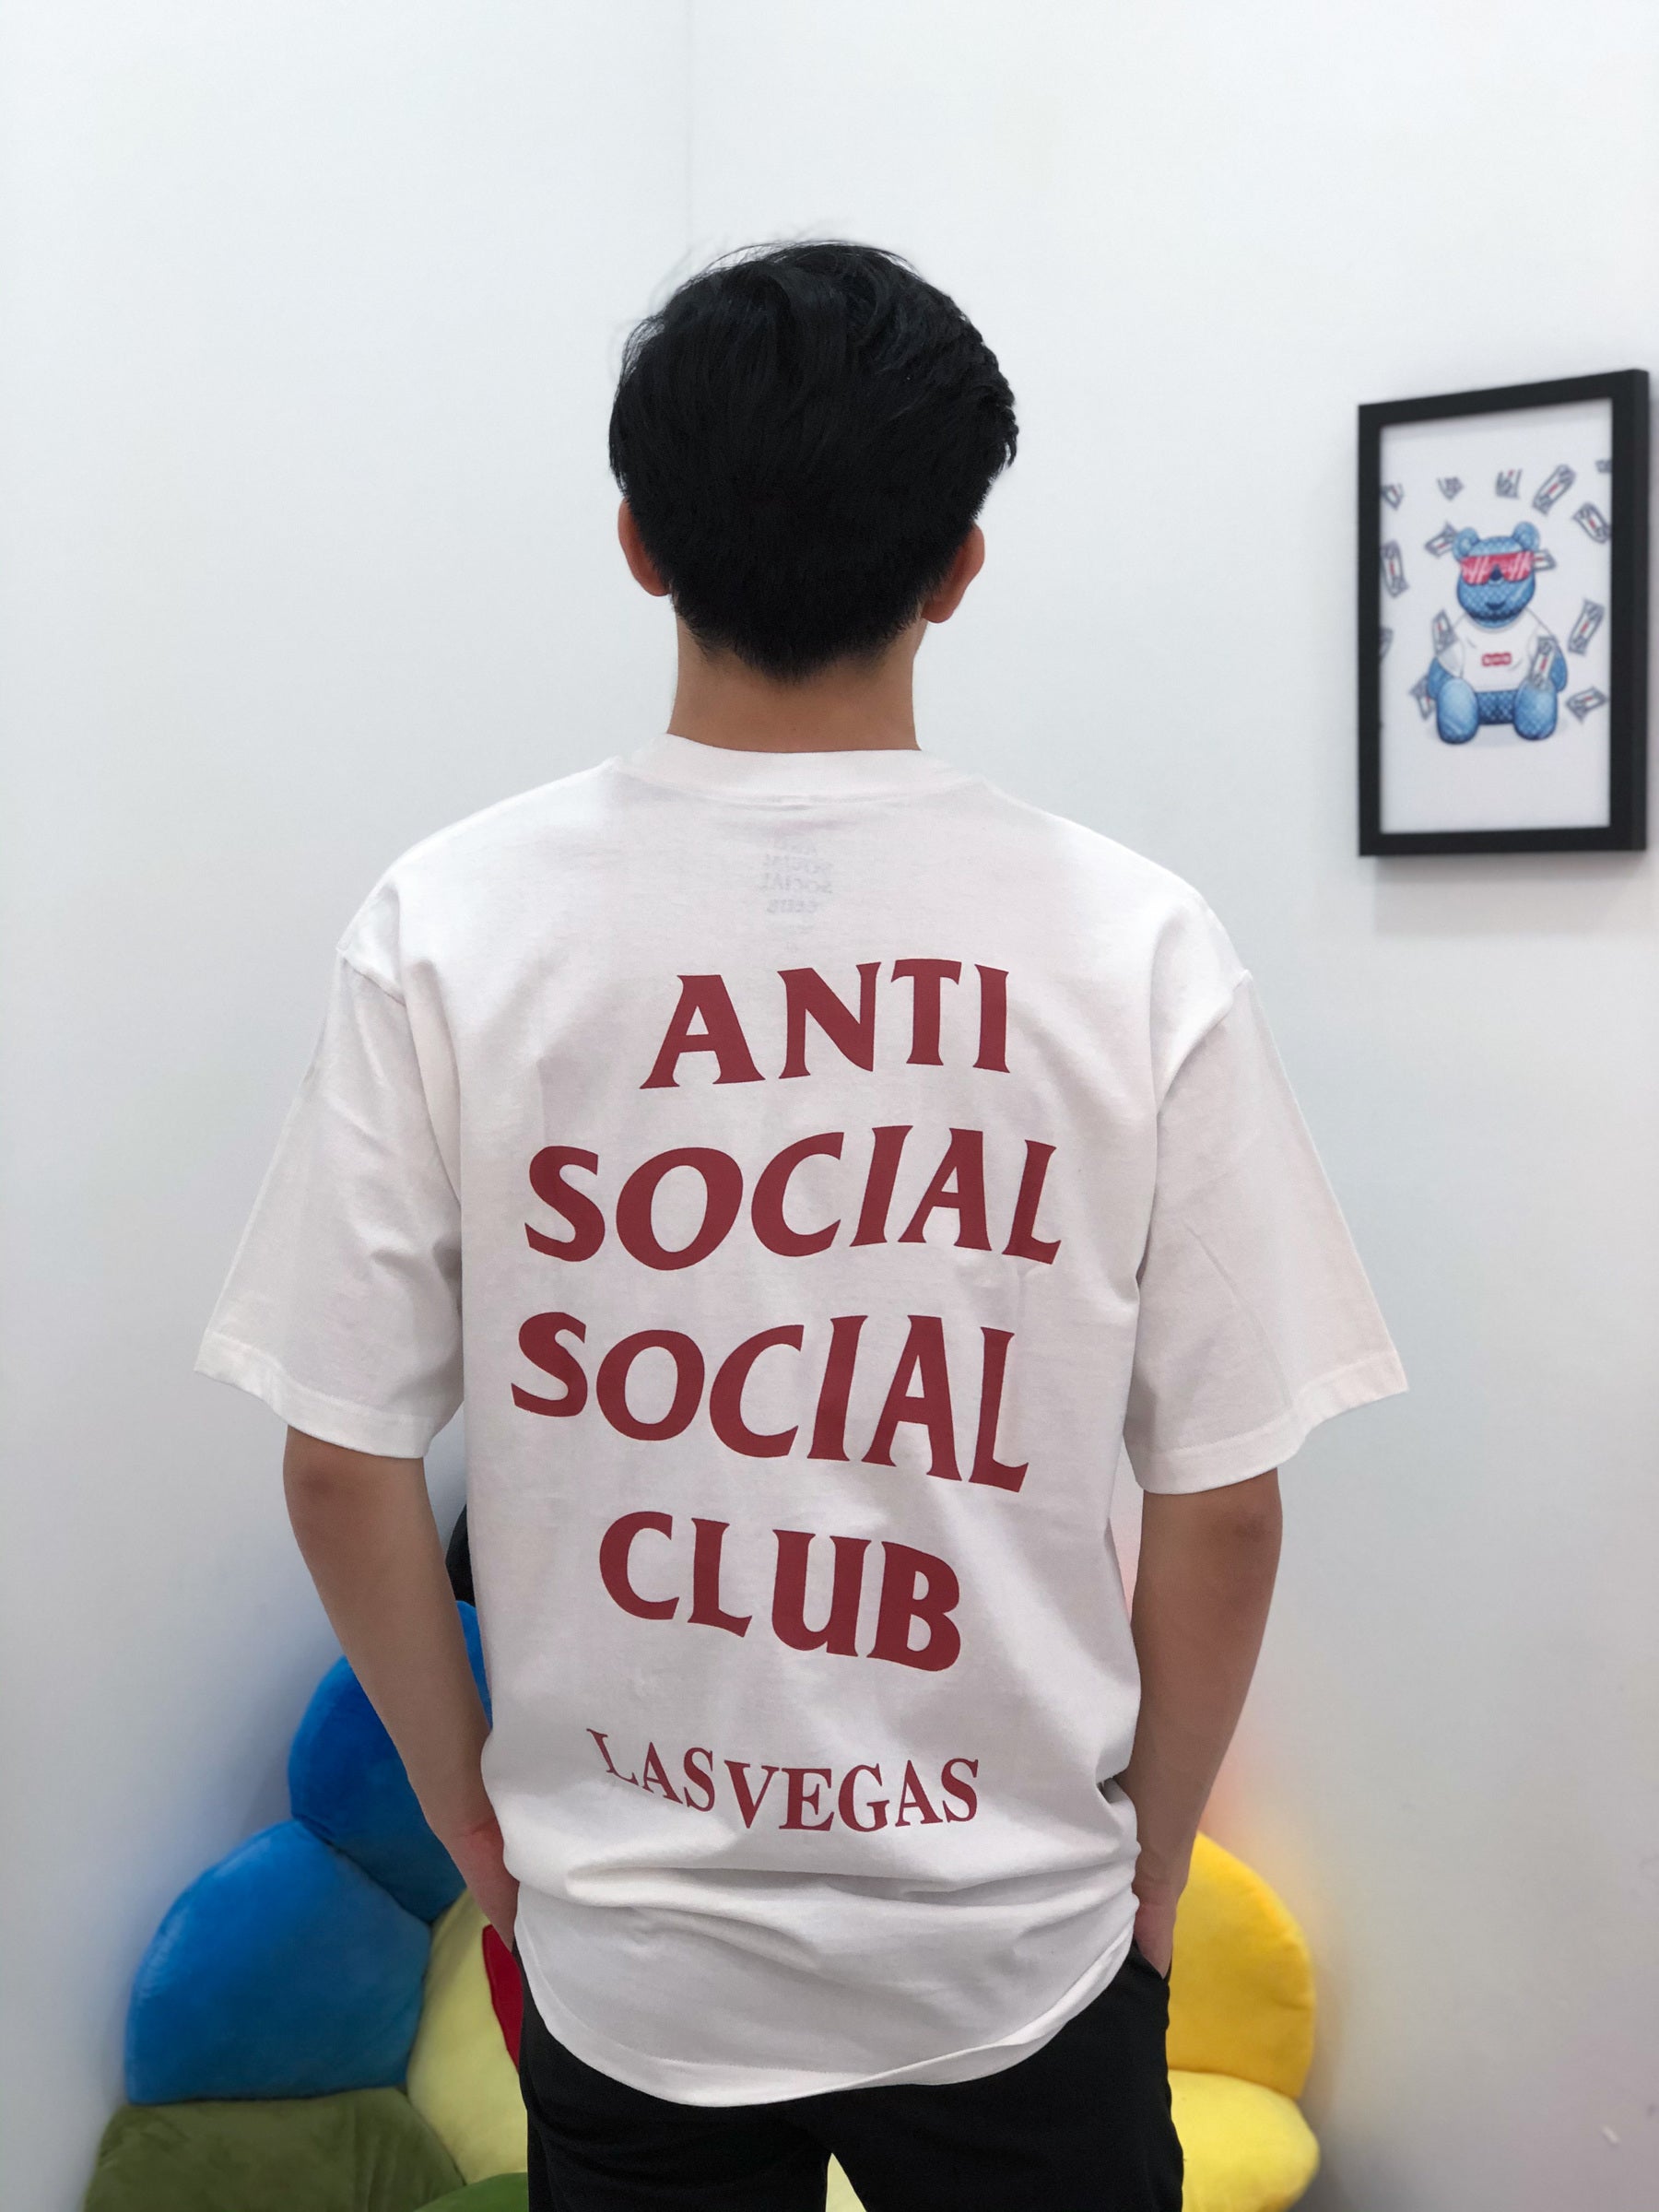 Anti Social Social Club Las Vegas T-Shirt - Shop Streetwear, Sneakers, Slippers and Gifts online | Malaysia - The Factory KL